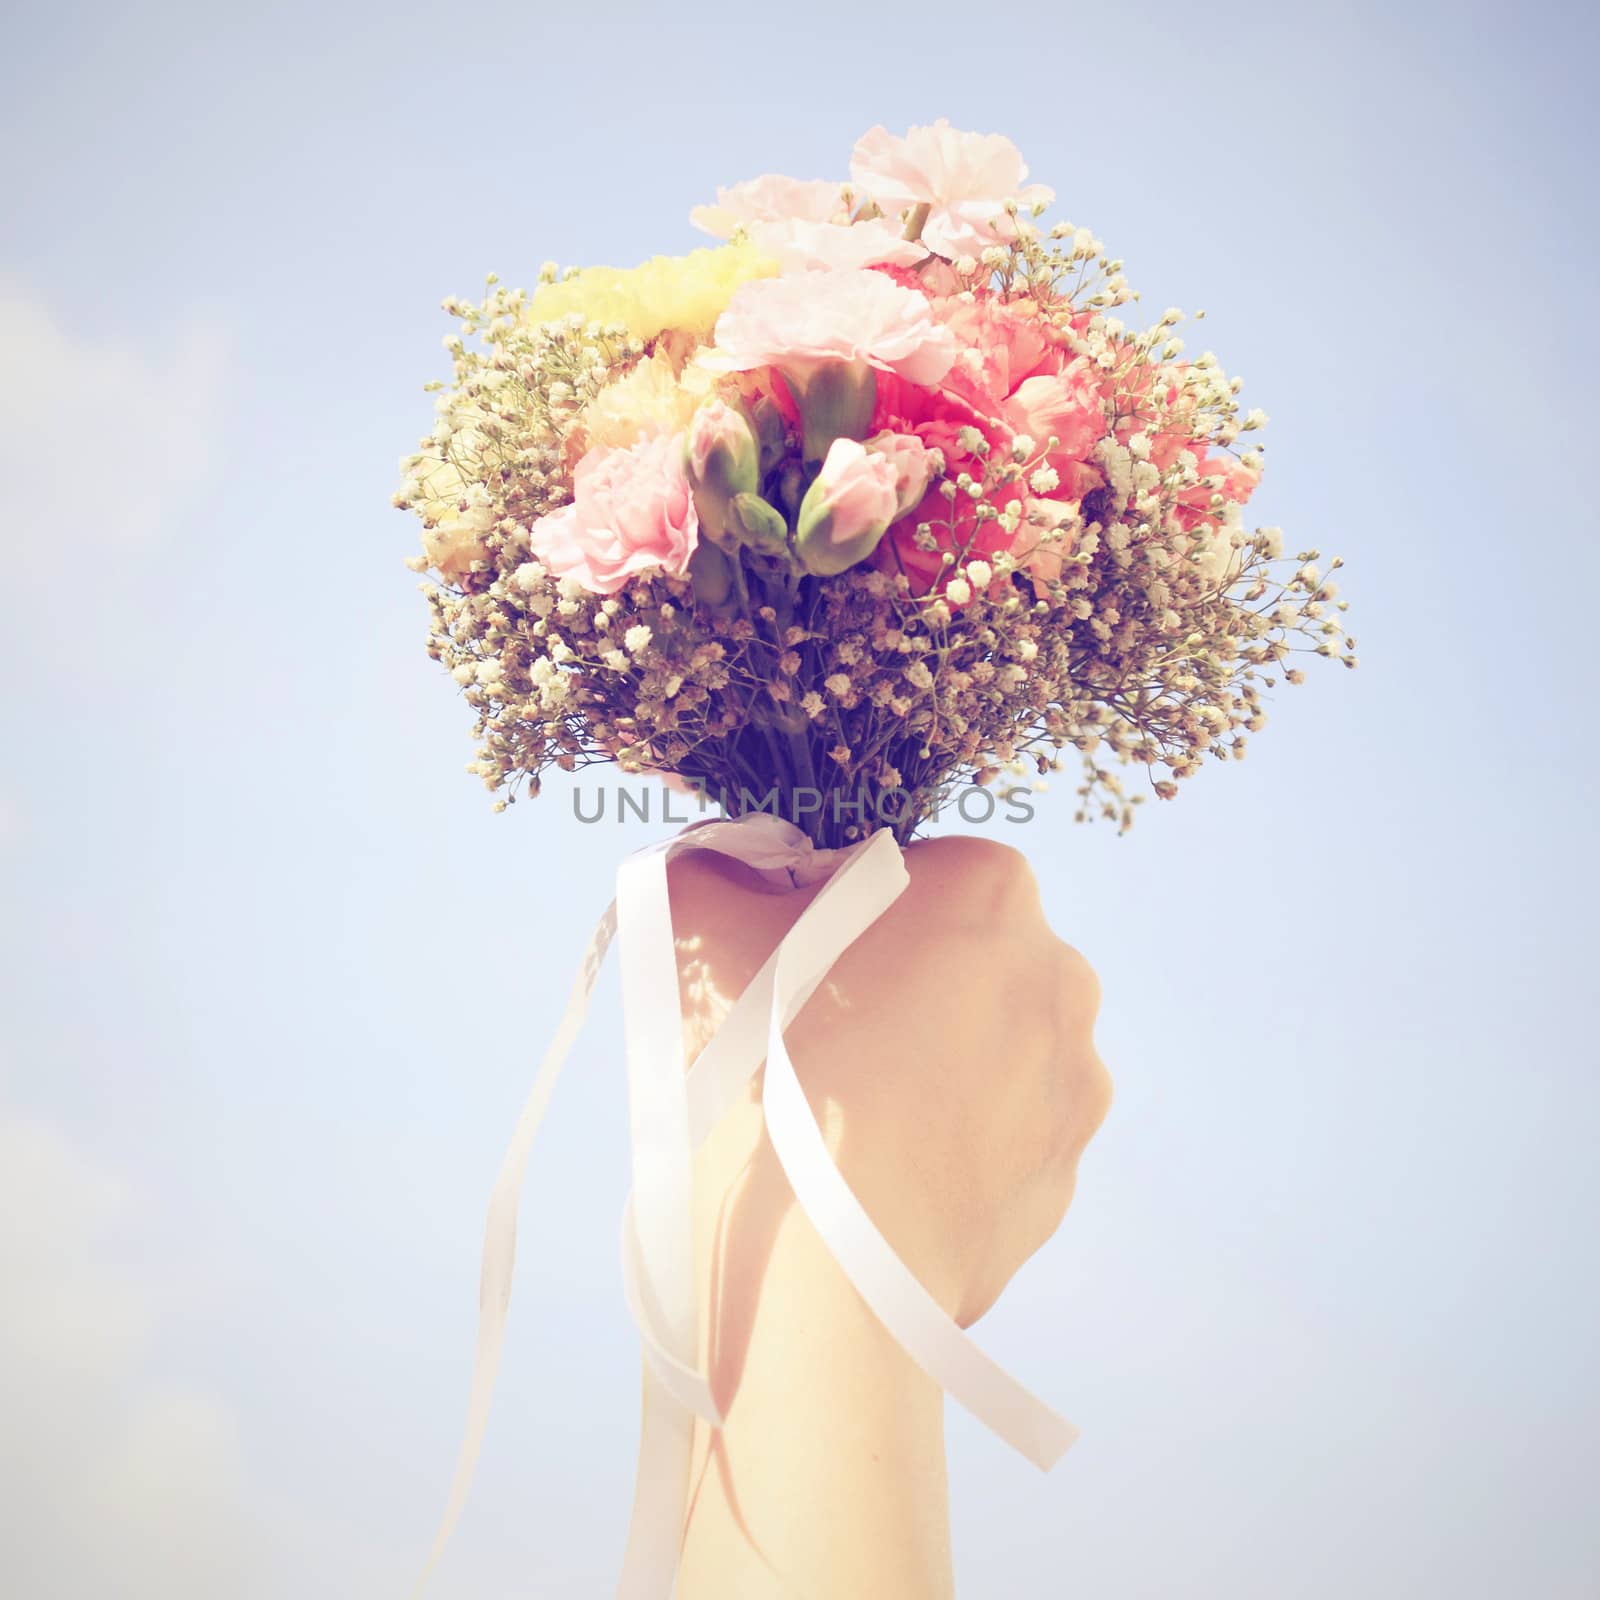 Bouquet of flower in hand and blue sky with retro filter effect